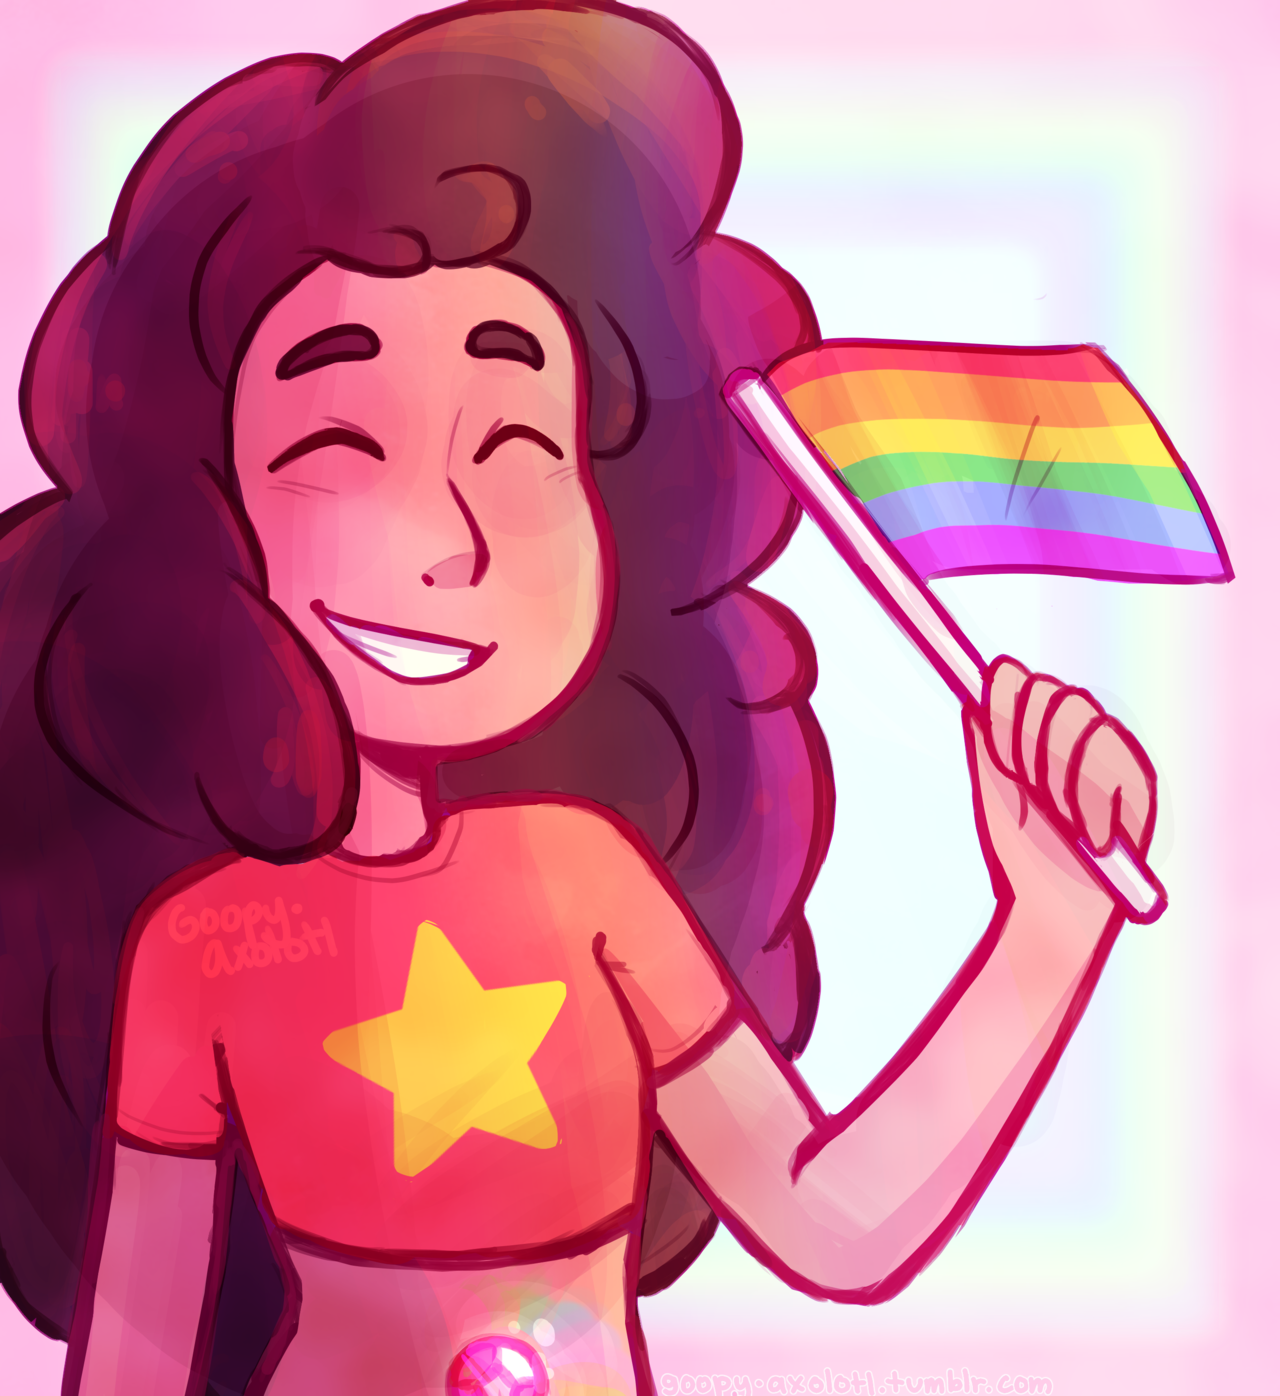 SU pride month doodles! feel free to add in your own headcanons (w/ credit to me) :3